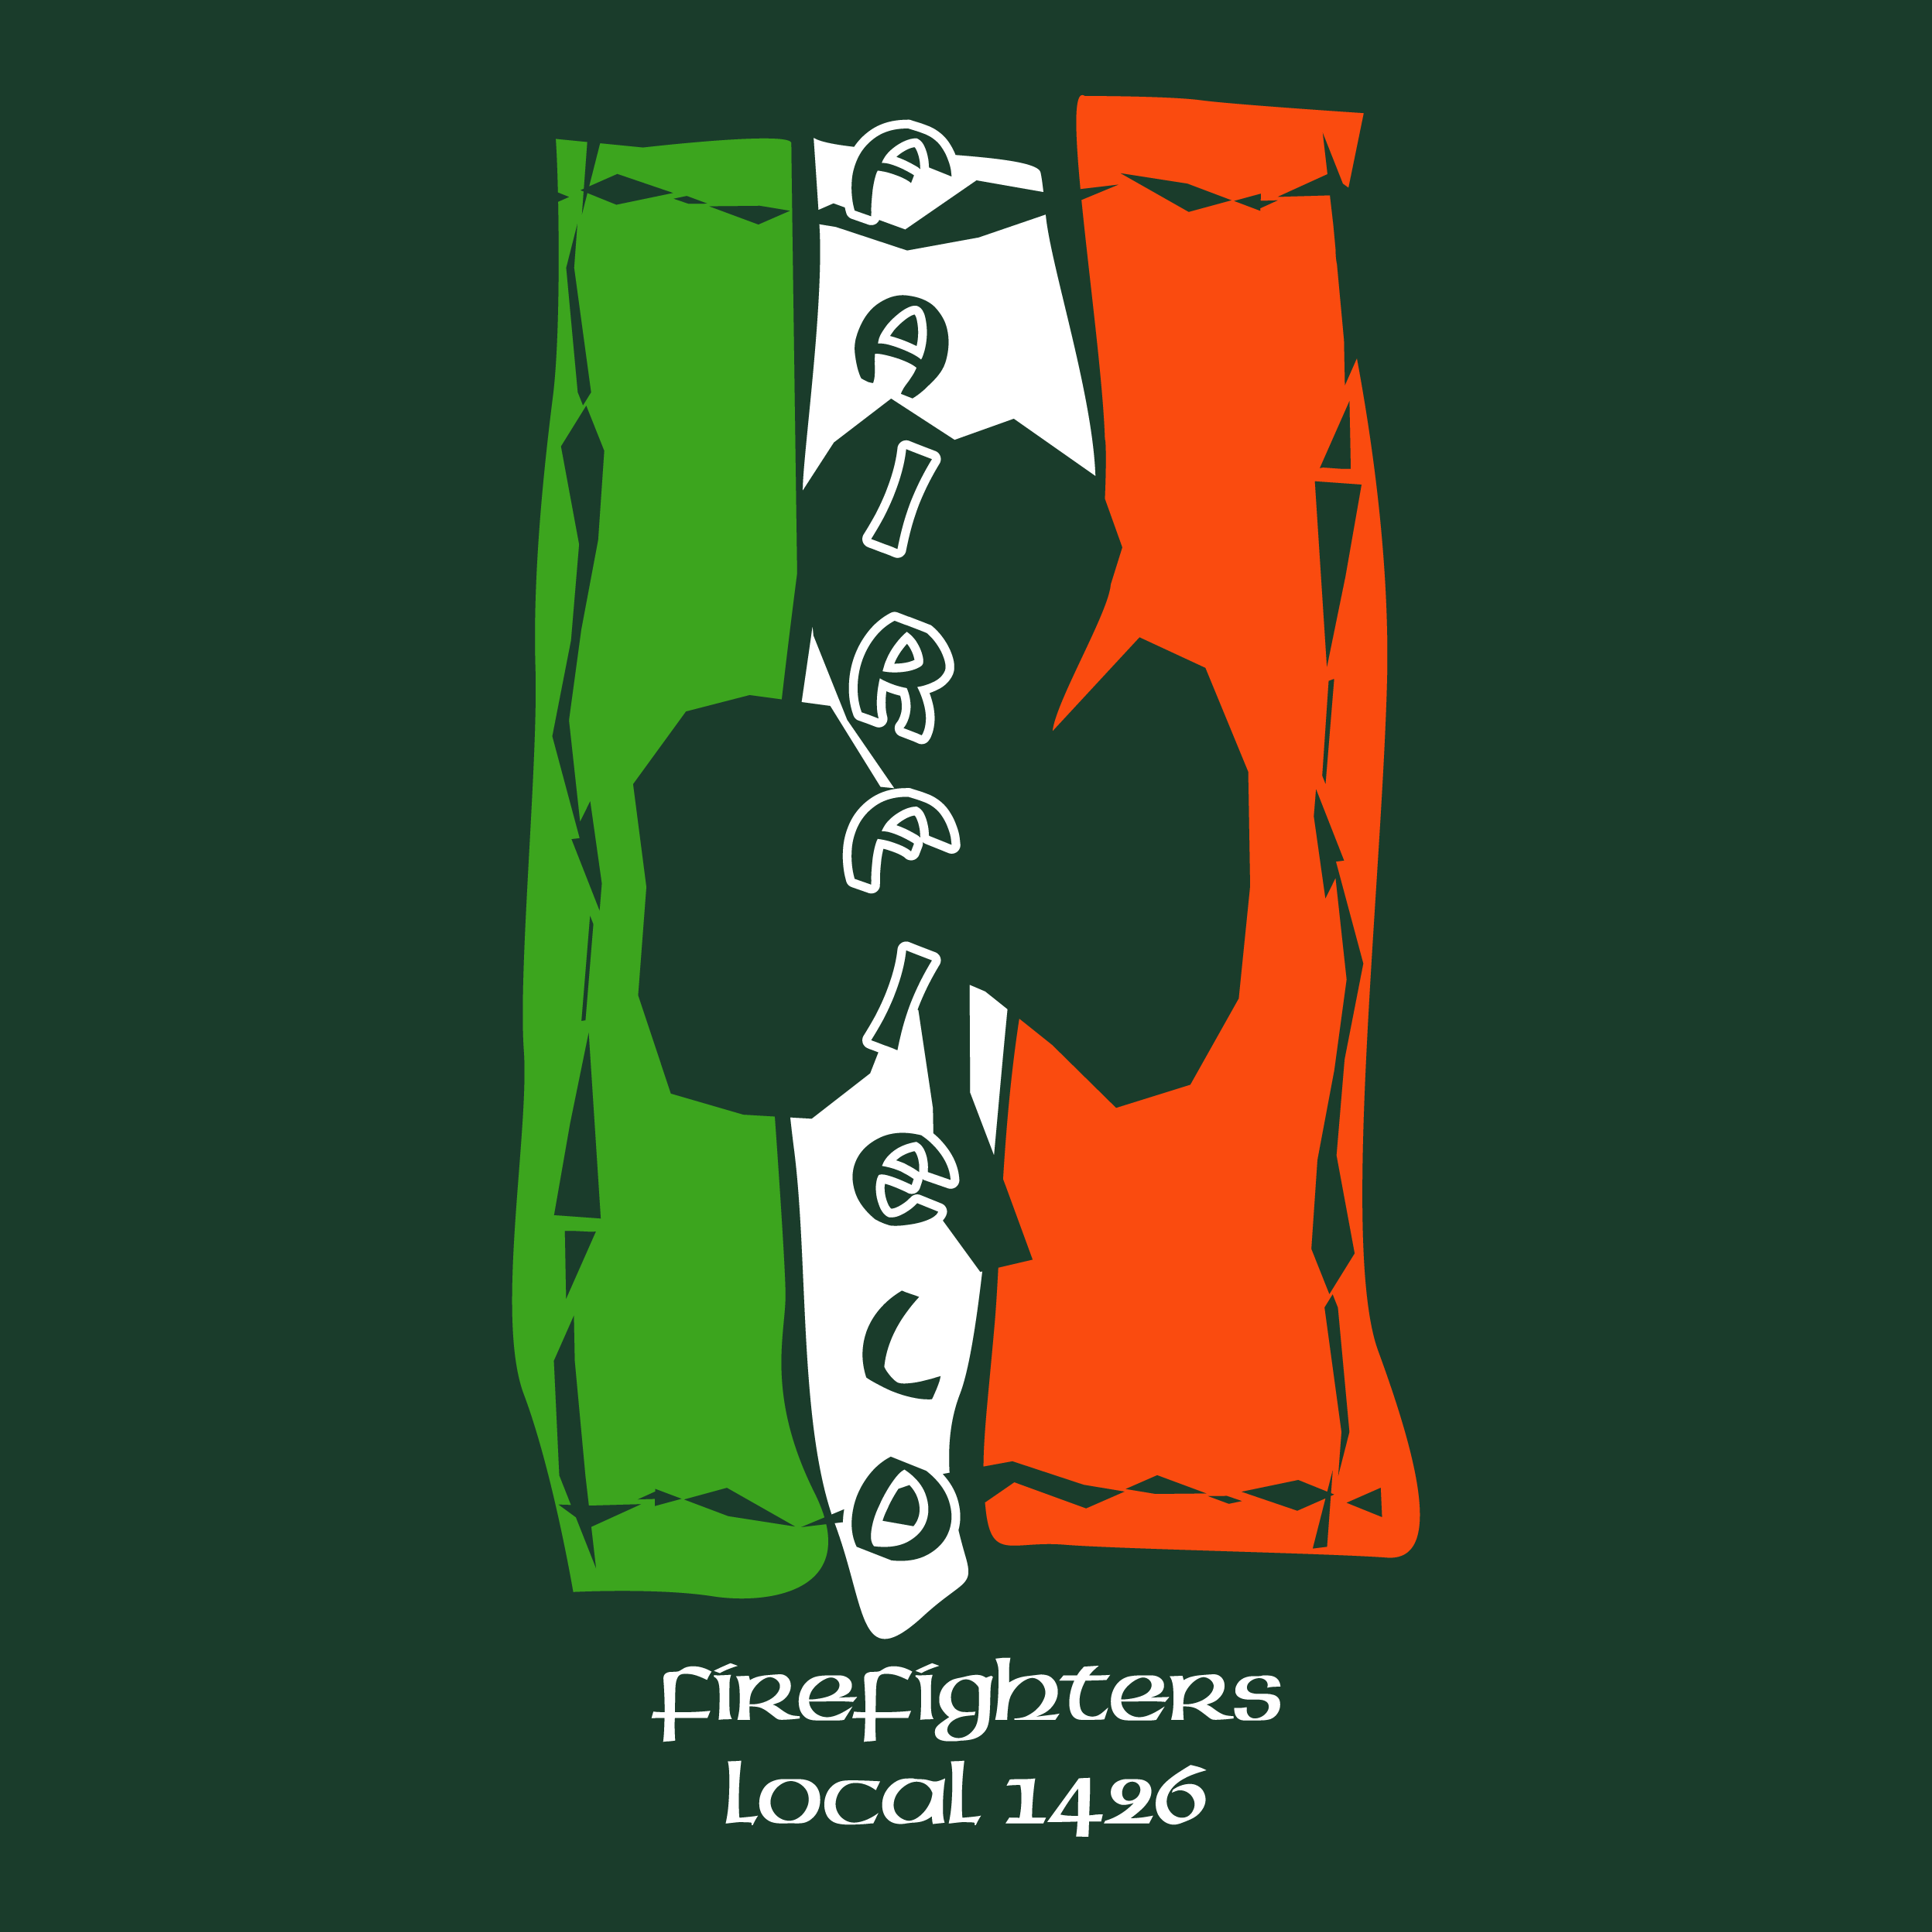 Fairfield Firefighters Charitable St. Patrick's Day Fundraiser shirt design - zoomed